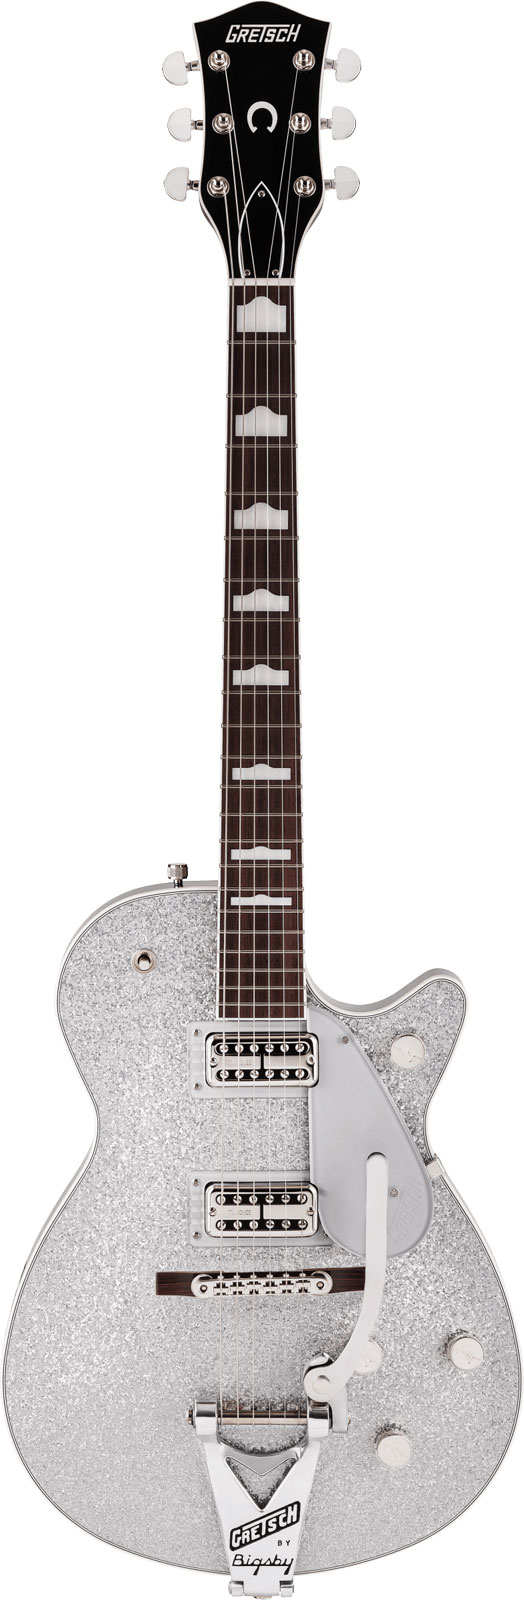 GRETSCH GUITARS G6129T-89 VINTAGE SELECT '89 SPARKLE JET WITH BIGSBY RW, SILVER SPARKLE